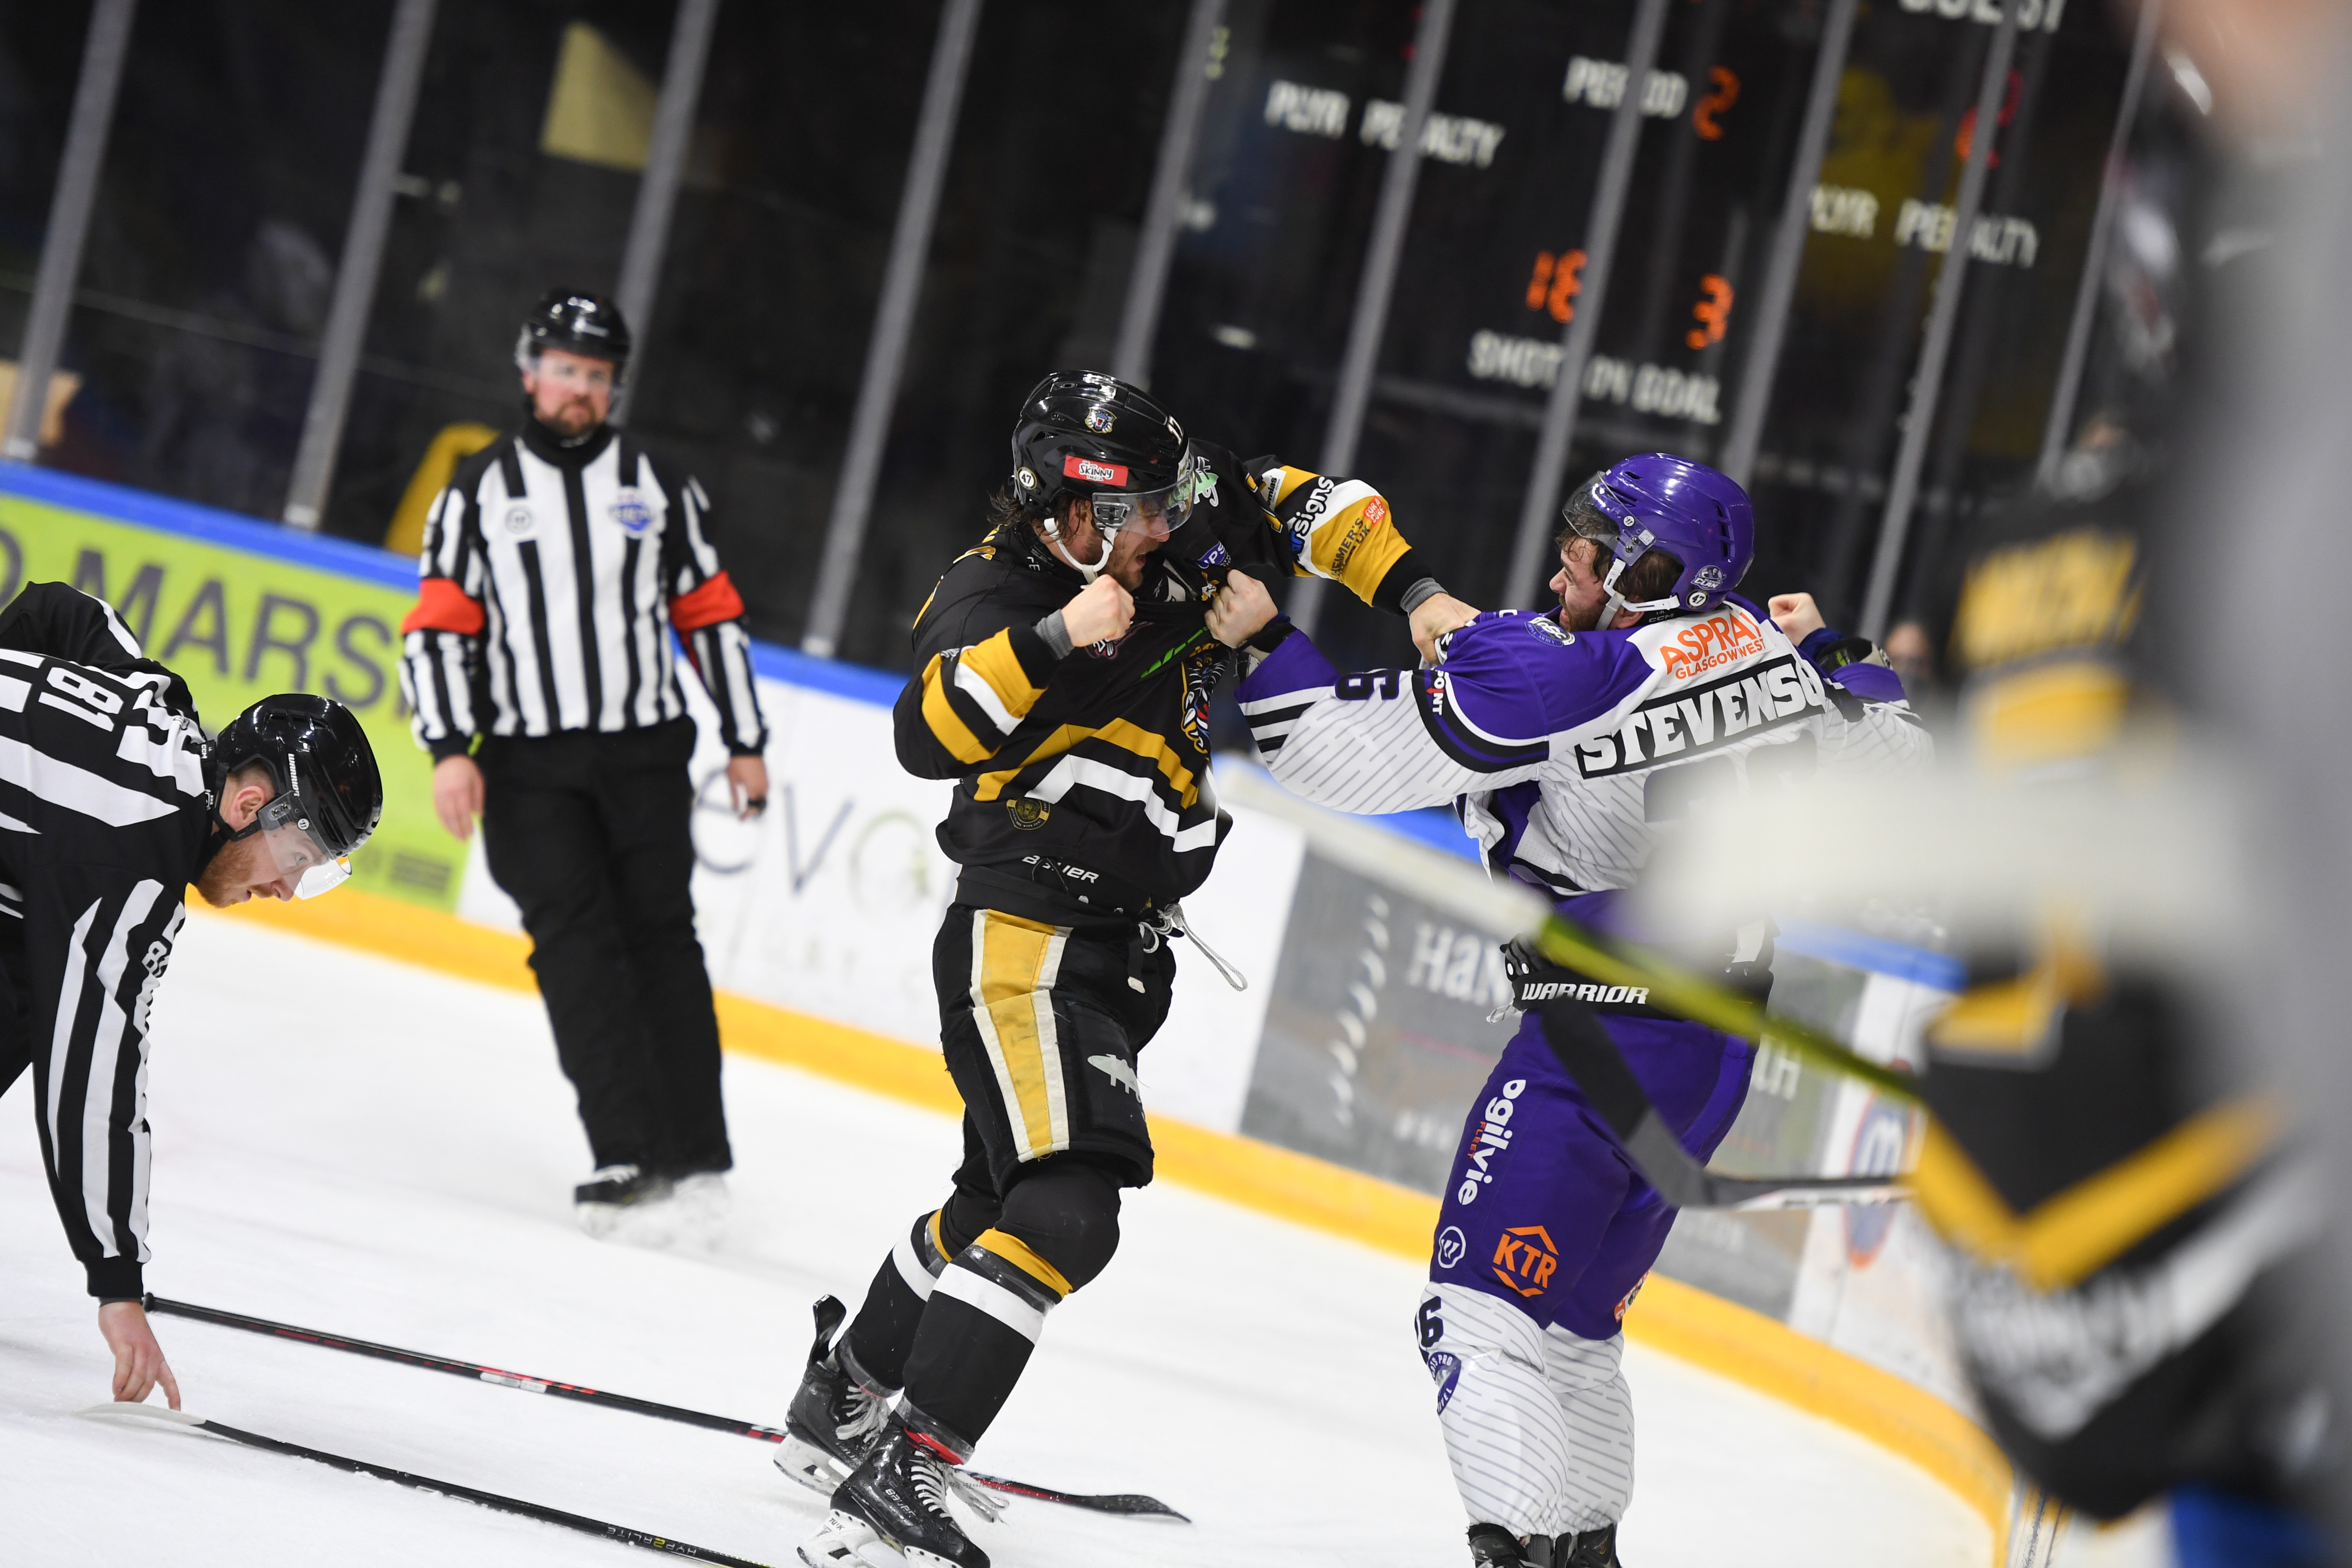 PODCAST ON HUGE WIN OVER CLAN AND STARS PREVIEW Top Image